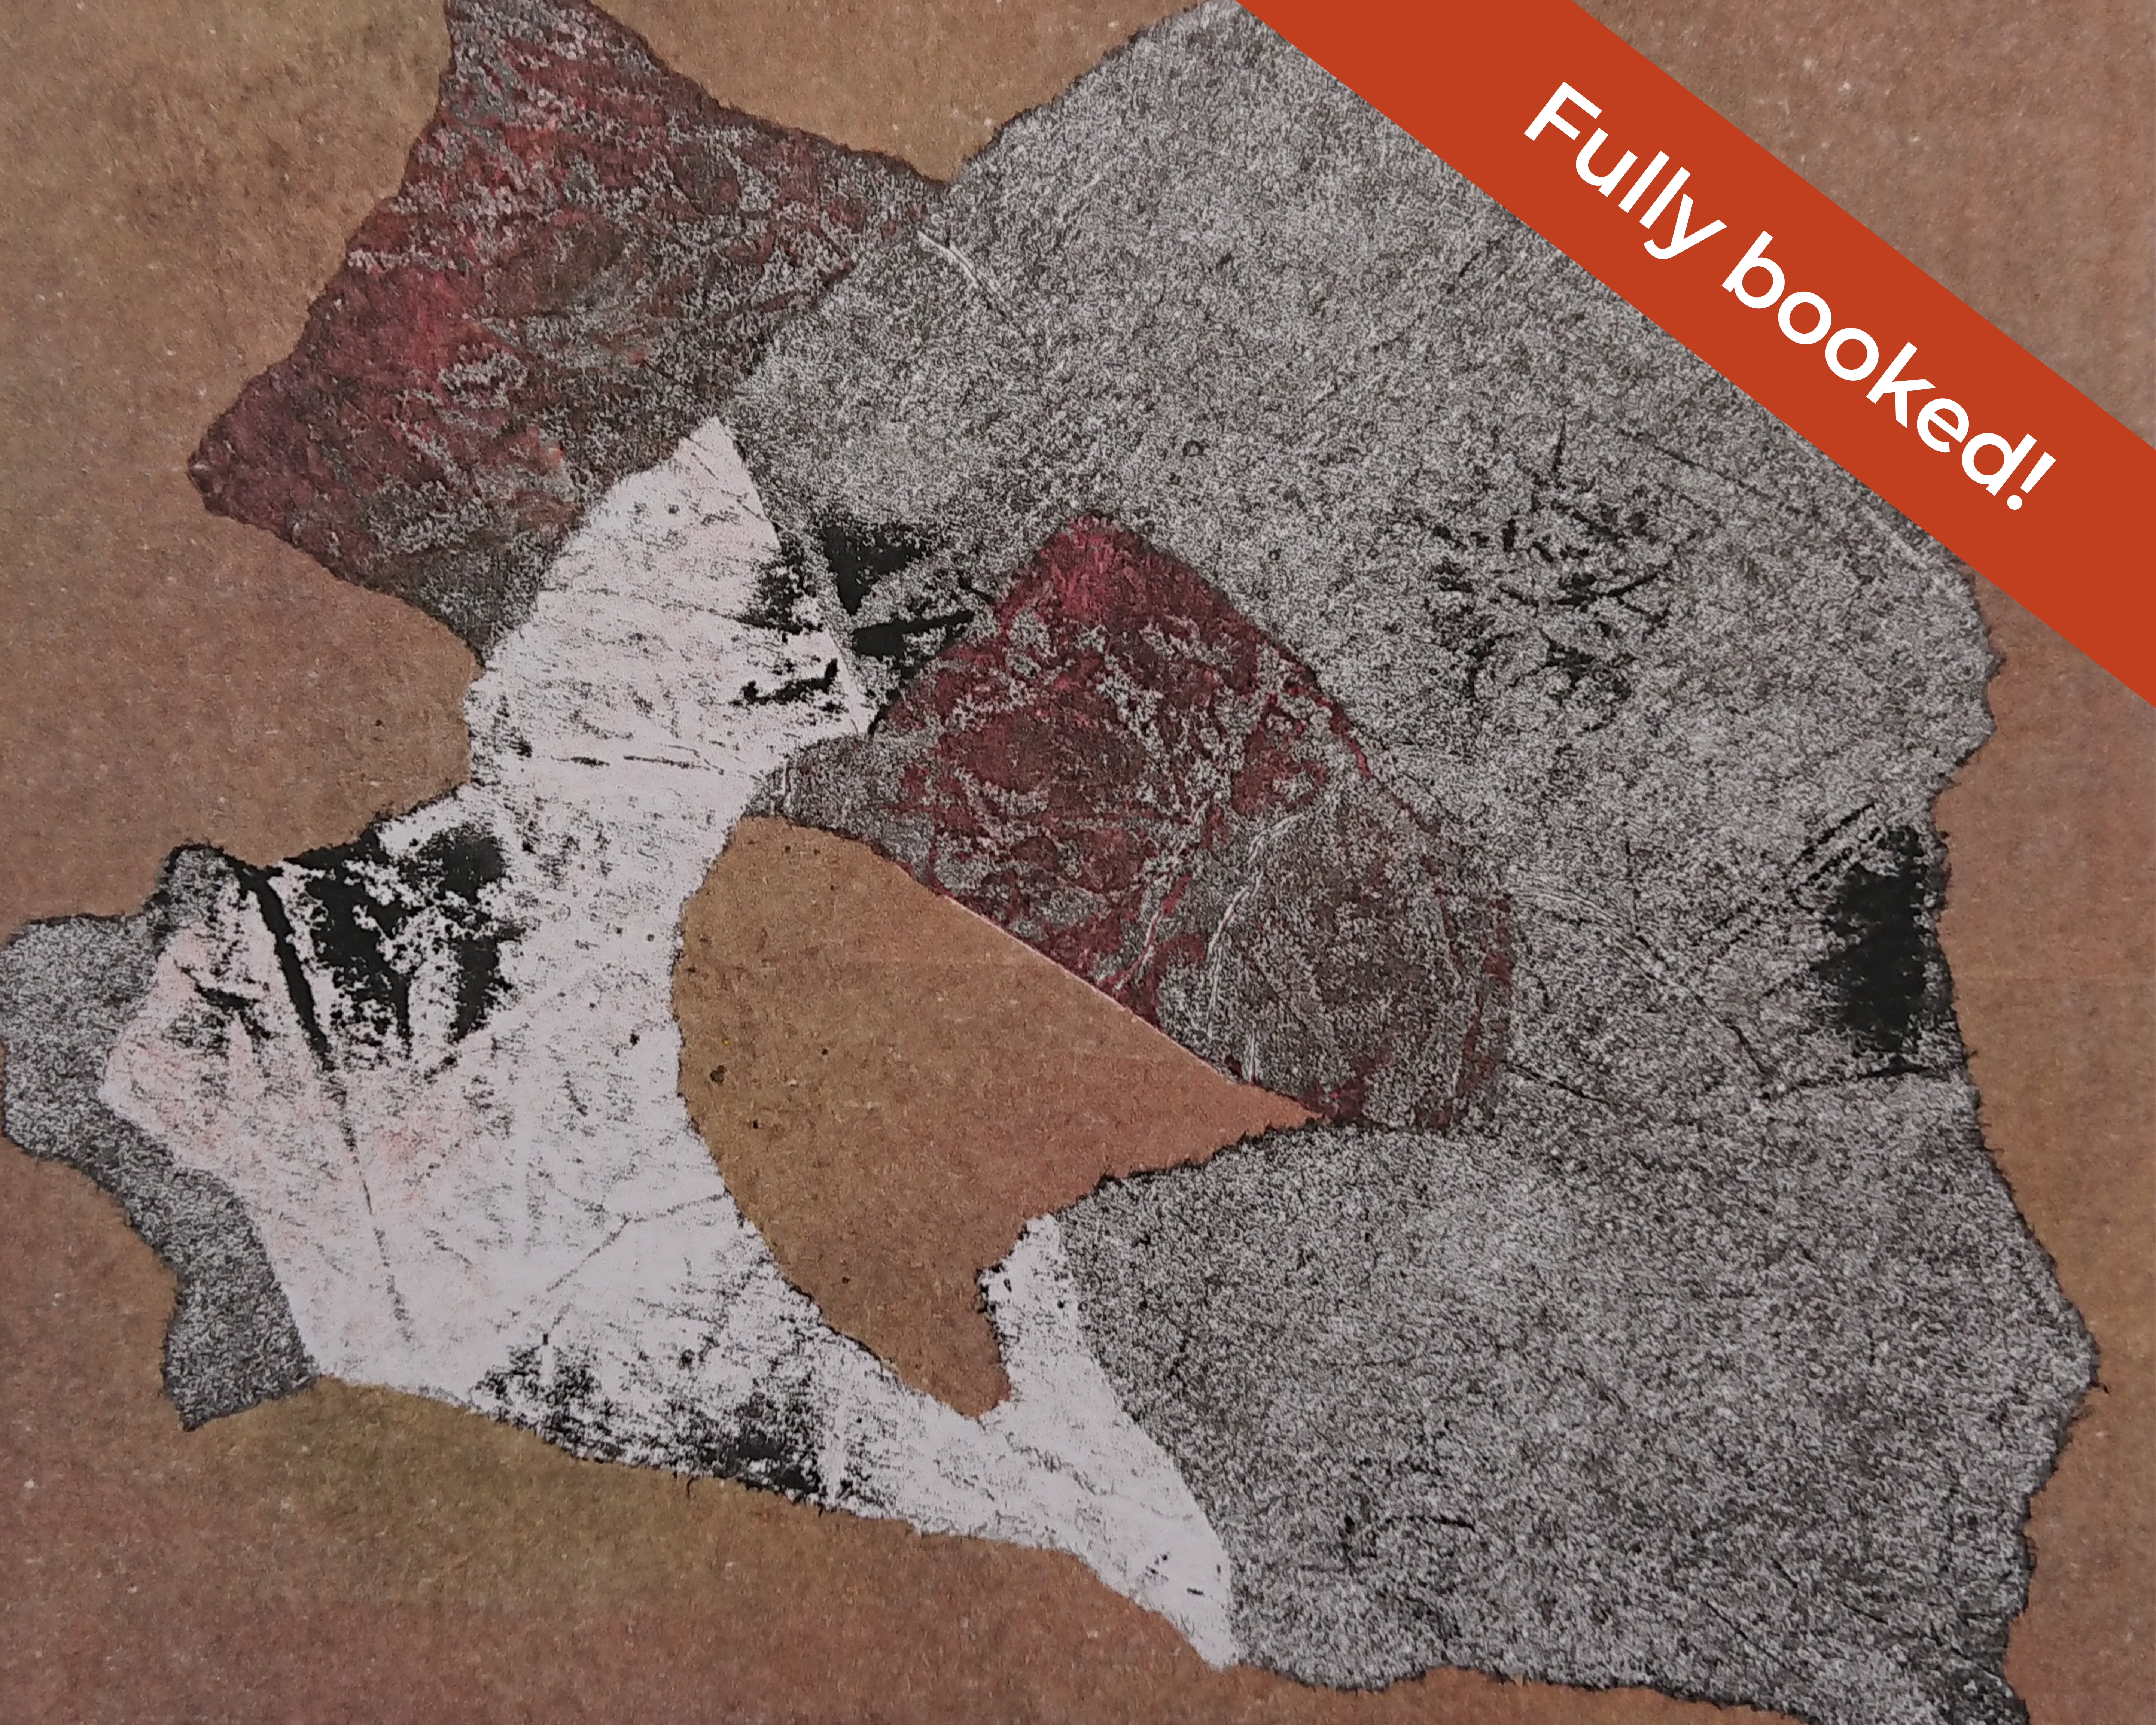 An image of a printed collage using the monotype technique. There is a red banner over the top right corner which reads: Fully booked!